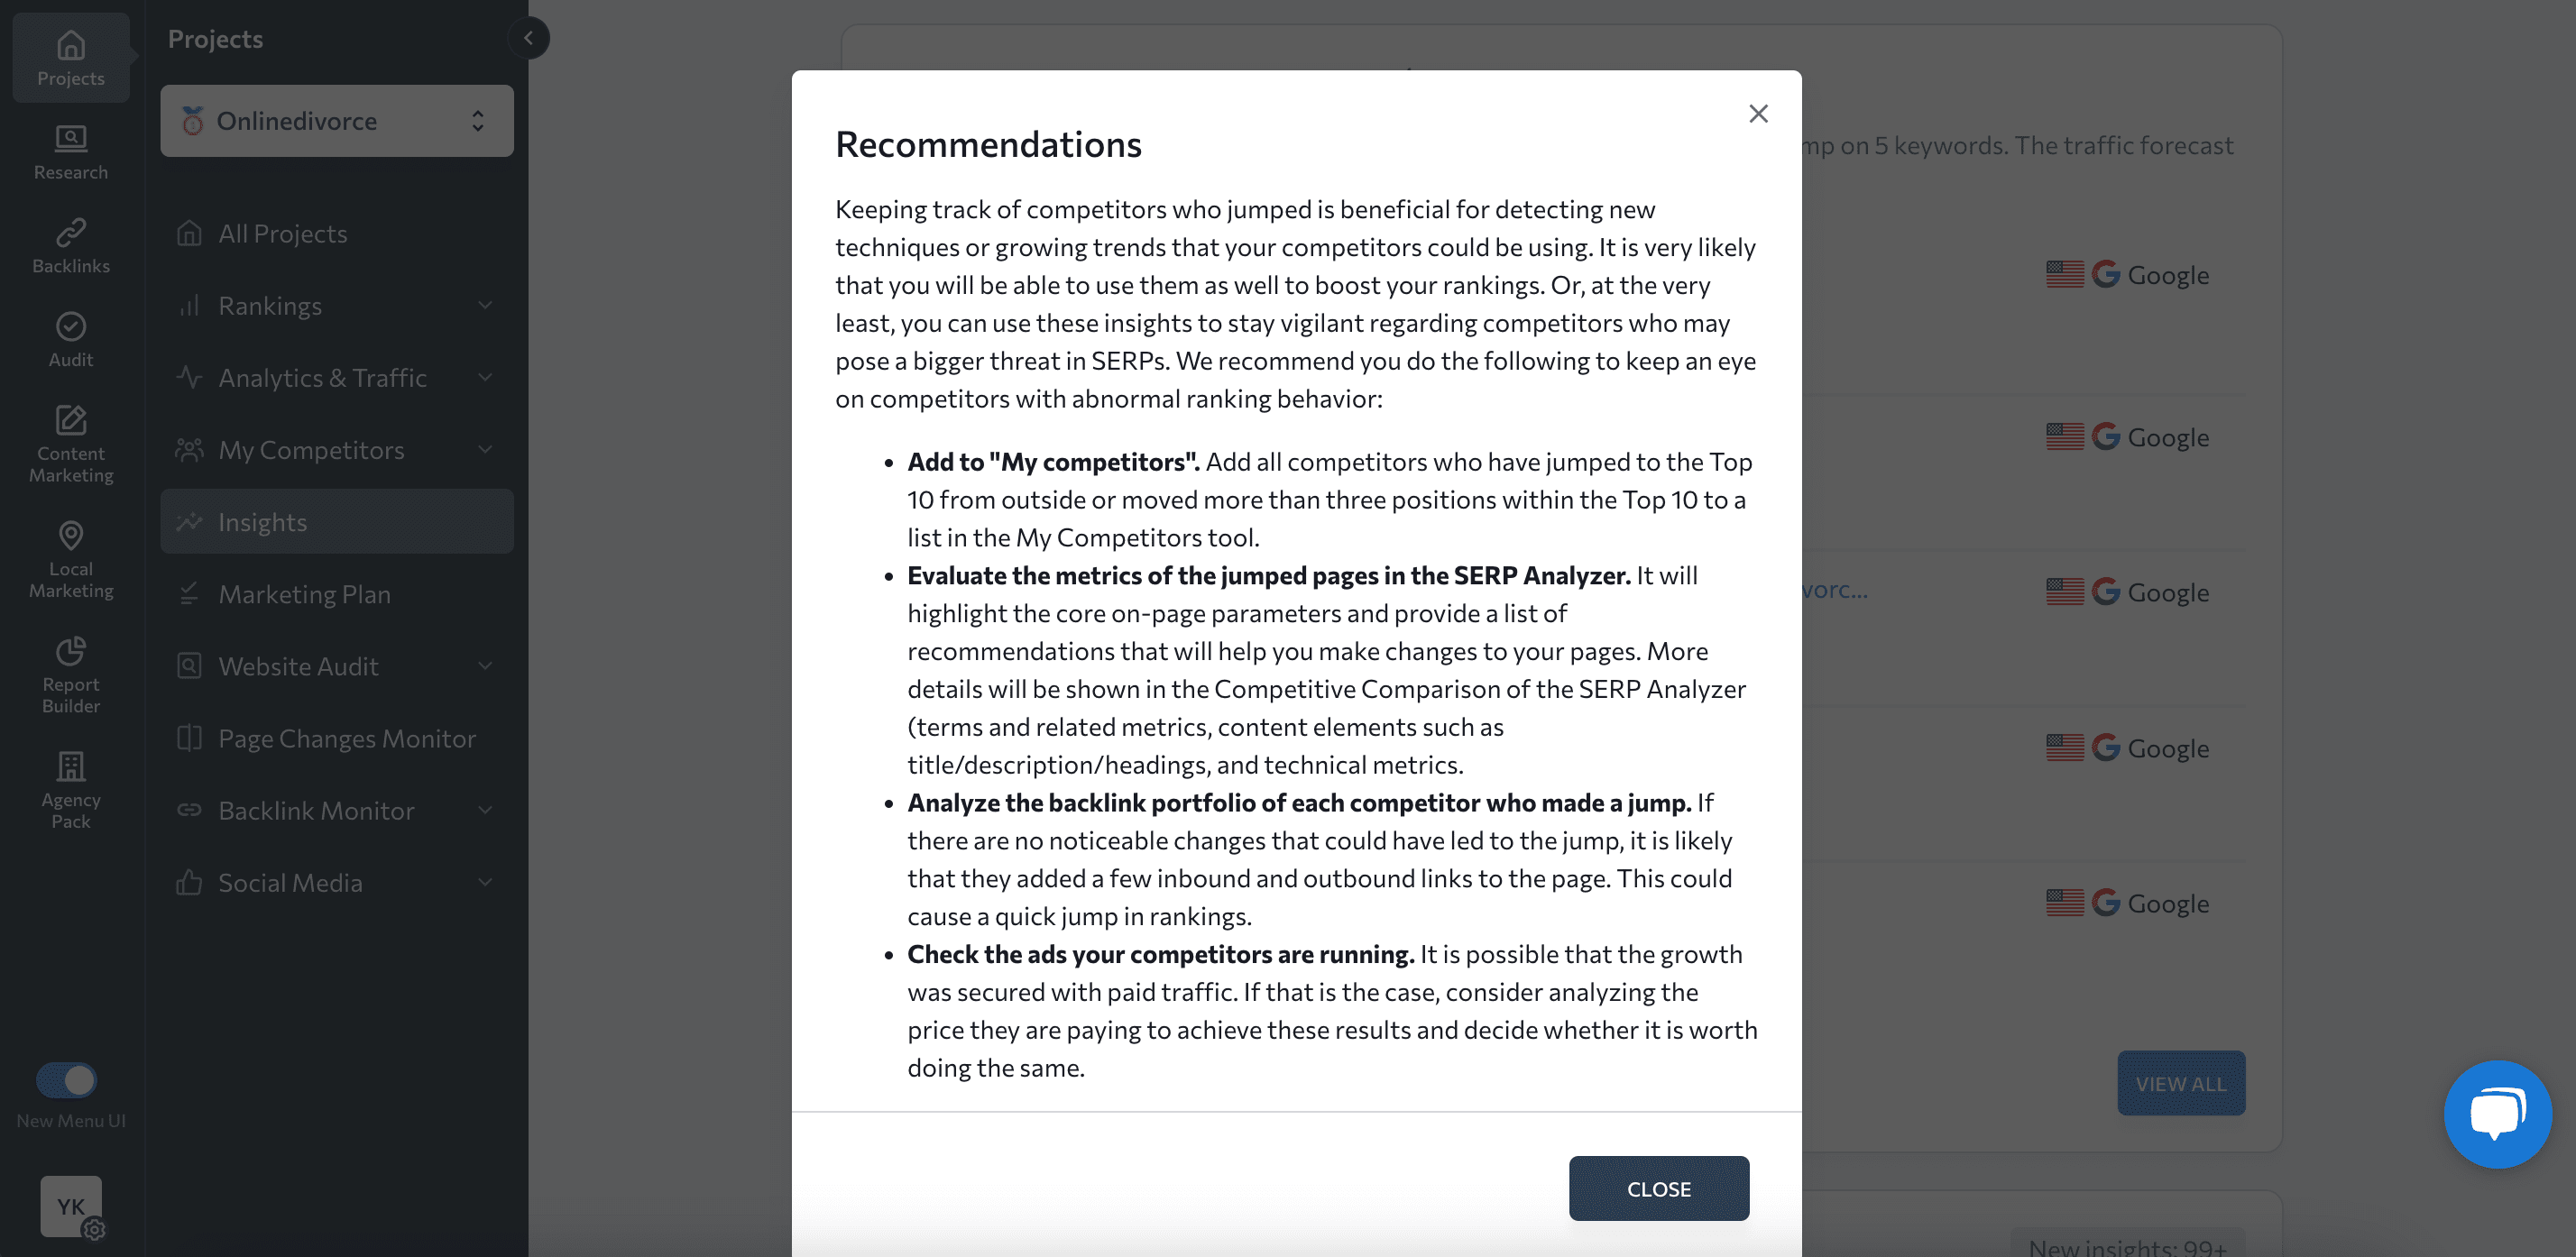 Recommendations in the Insights tool